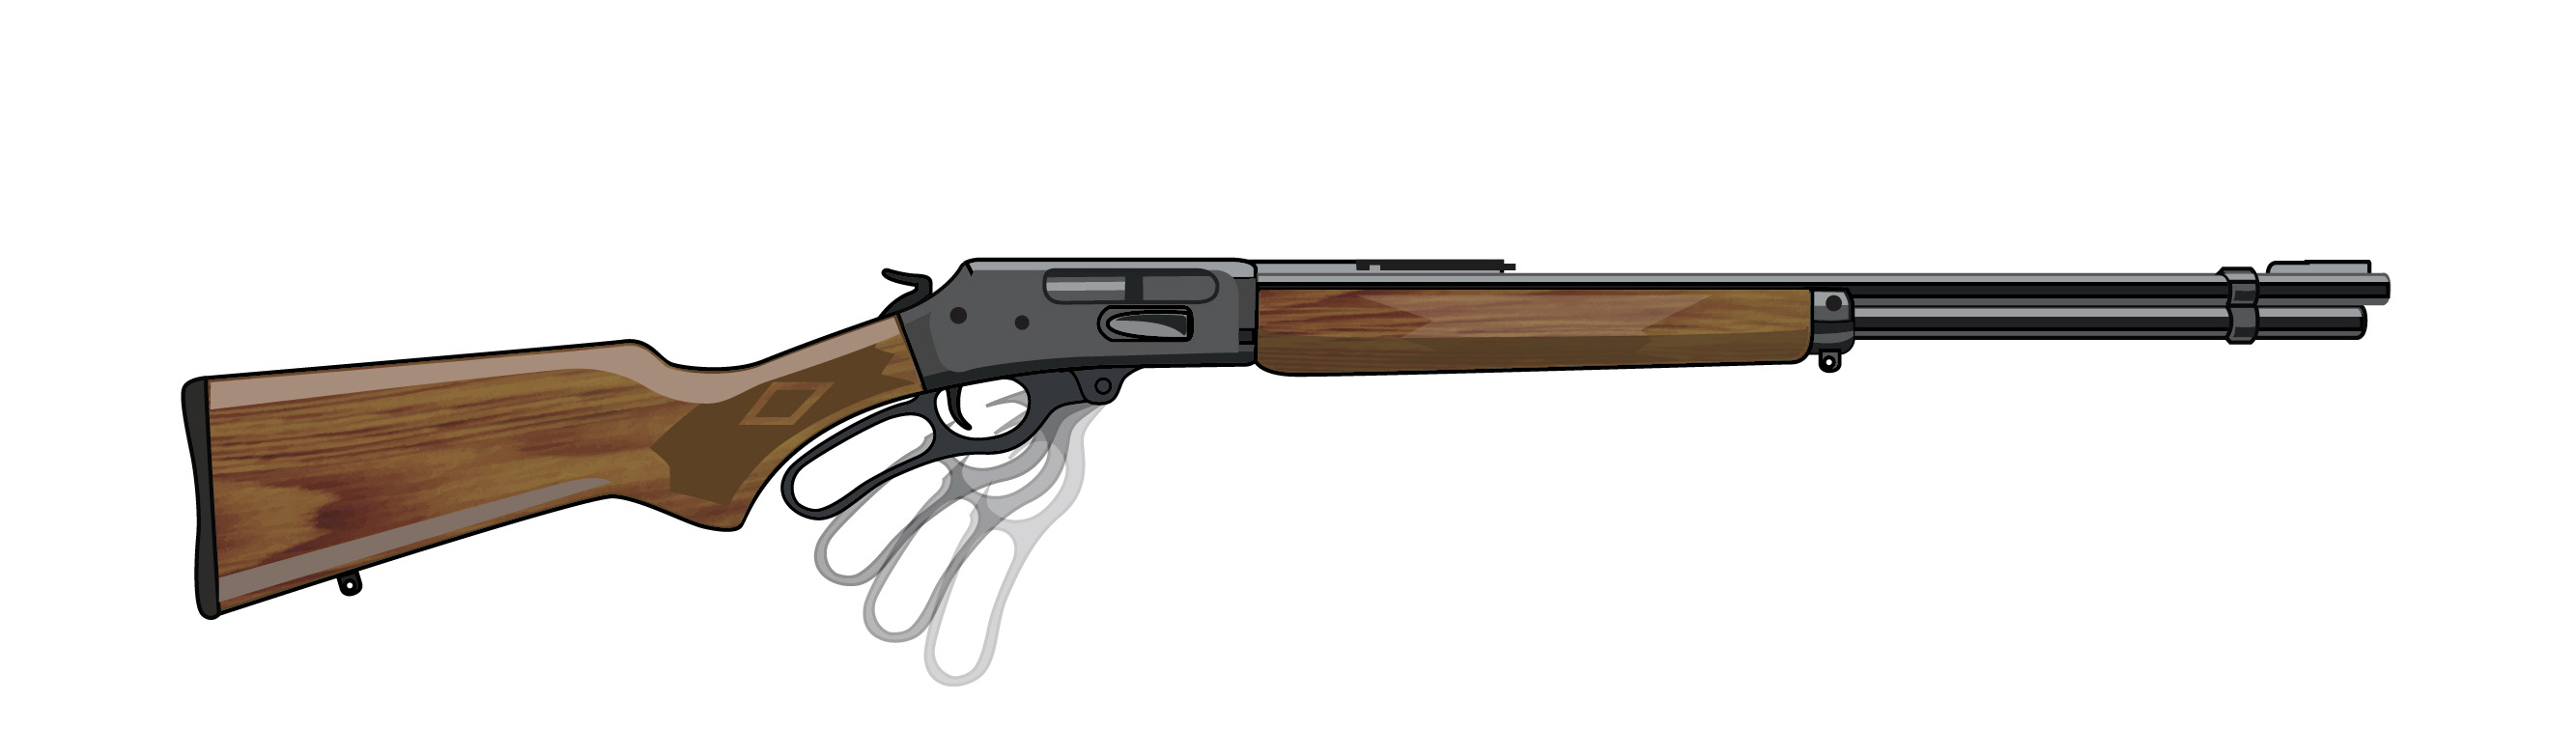 Illustration of a lever action rifle.